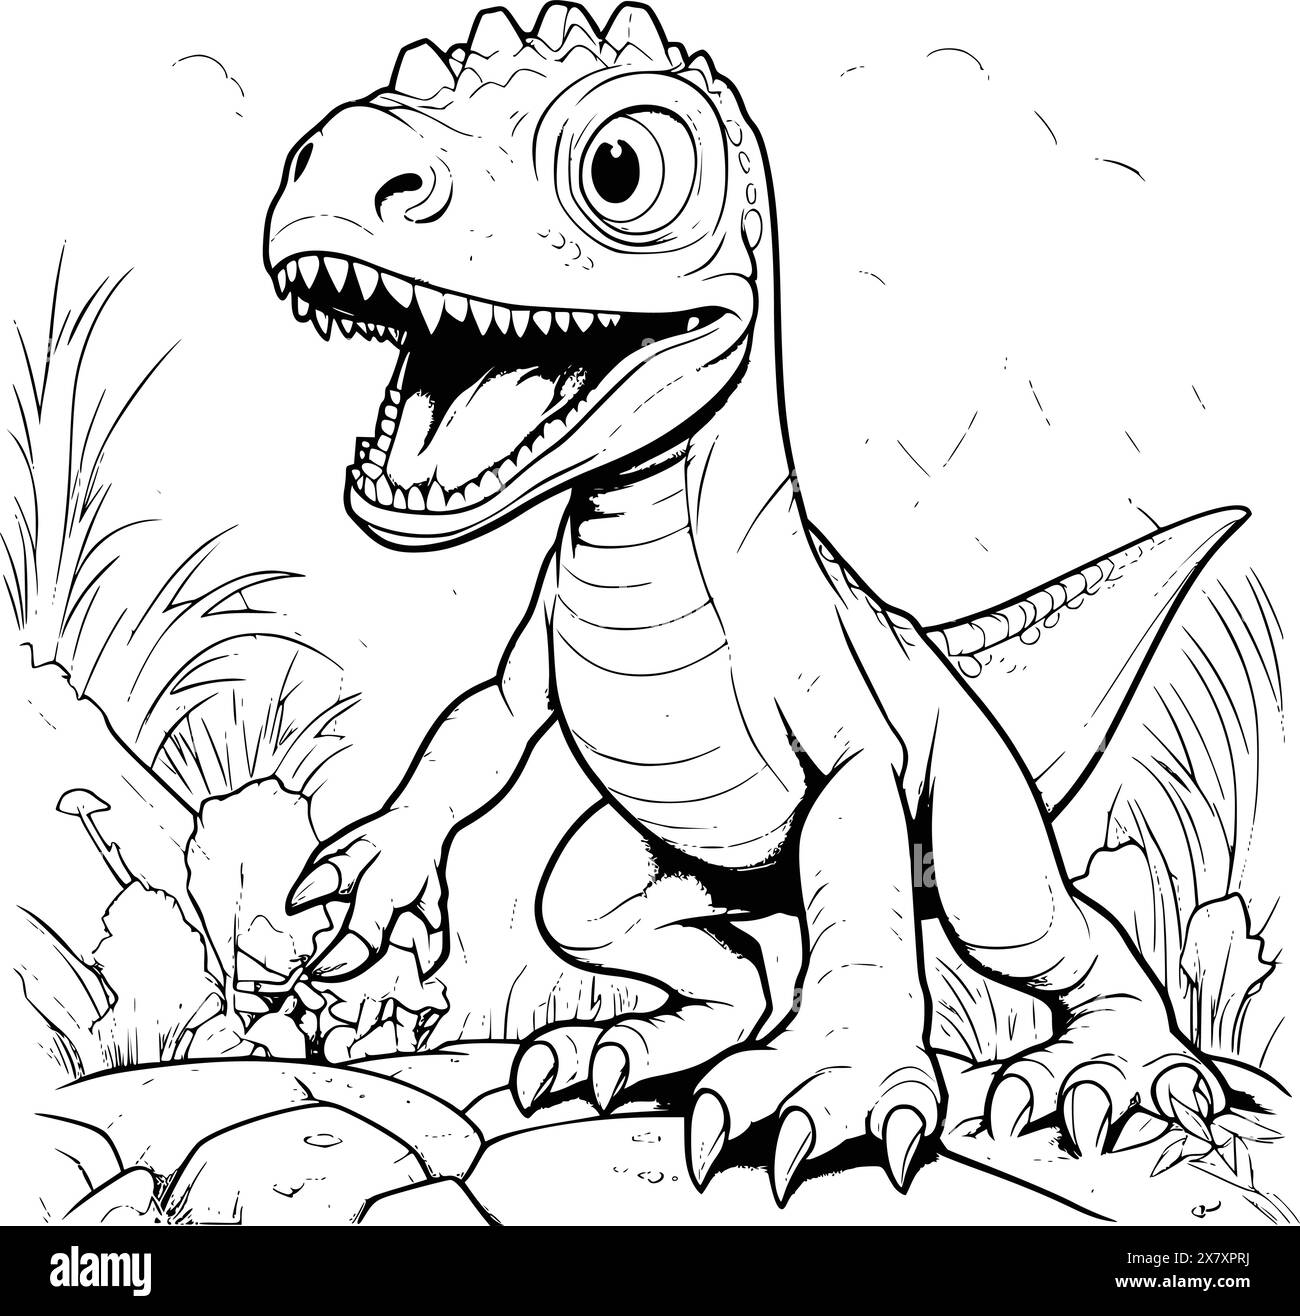 Dinosaur Coloring Pages Drawing For Kids Stock Vector